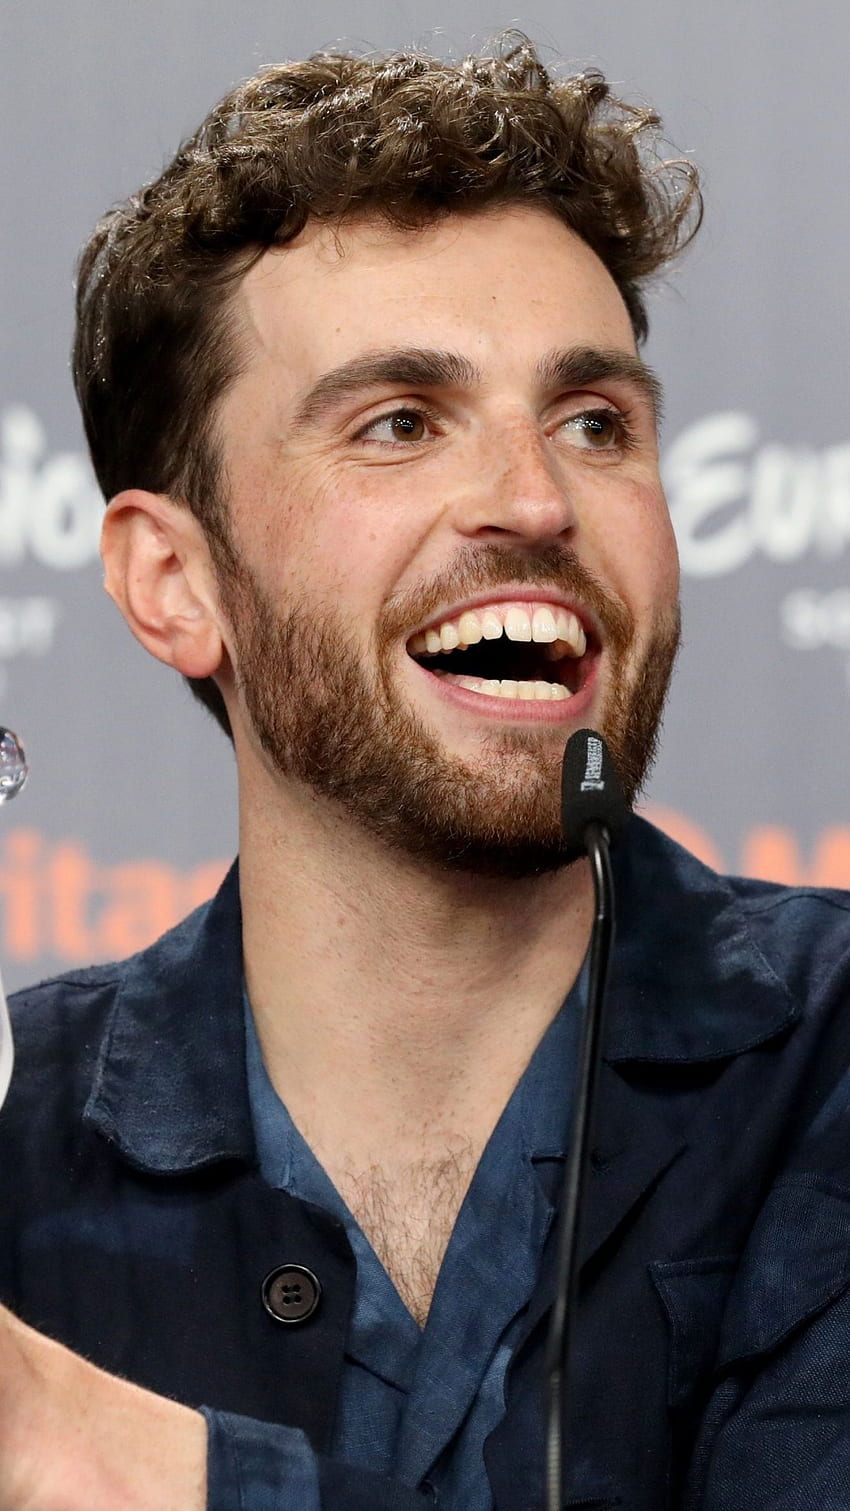 Duncan Laurence、Eurovision 2019、iPhone 8、iPhone 7 Plus、iPhone 6+、Sony Xperia Z、HTC One の勝者 HD電話の壁紙